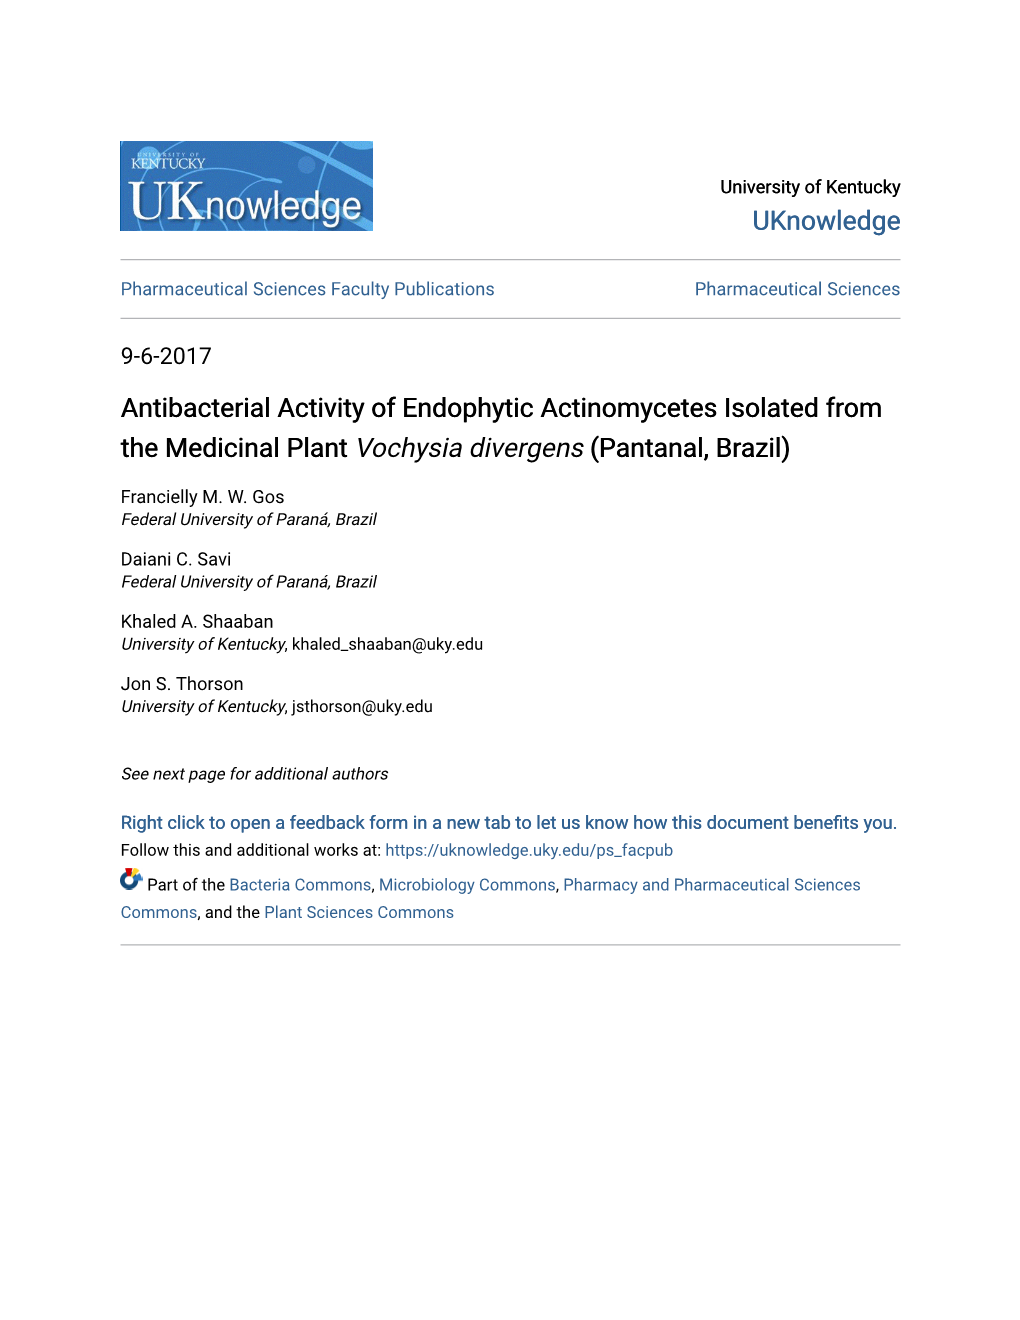 Antibacterial Activity of Endophytic Actinomycetes Isolated from the Medicinal Plant Vochysia Divergens (Pantanal, Brazil)